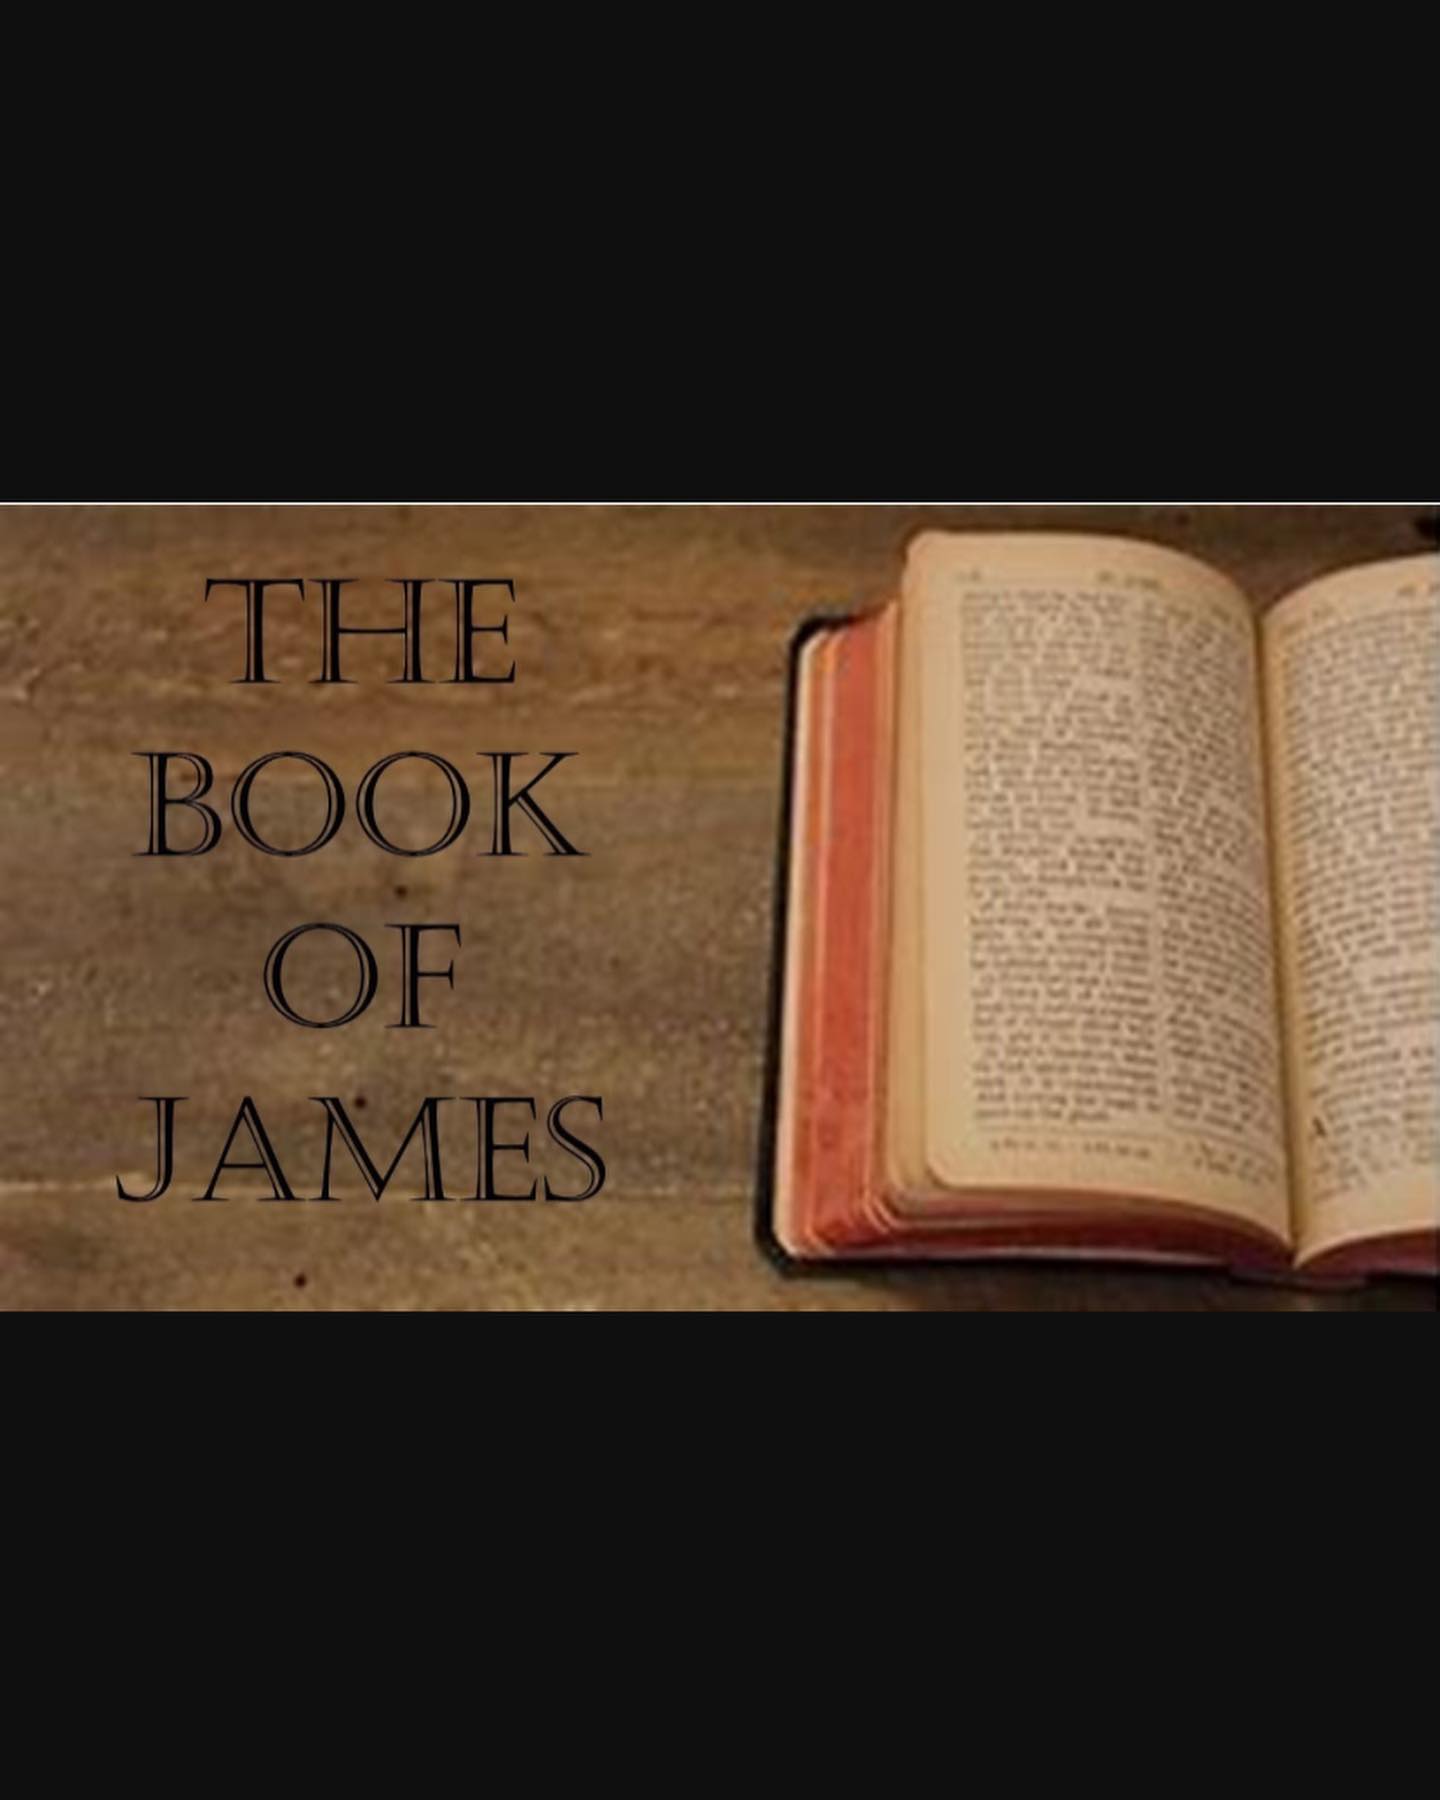 The letter of James is highly relevant to the Christian life. This 5 chapter epistle, likely written by the half-brother of Jesus, deals with the “practical” side of faith and meets us in the routine moments of our day. James meets us in our suffering, our sickness and our hardship. He confronts us in our speech, our wealth, and our pride. He directs us when we lack wisdom on what to do next. It’s a glove box instruction manual for the follower of Christ! Join us Sunday 10AM @fallbrookvineyardchurch as we open our Bibles together and get into the nitty gritty of the New Testament, the book of James. We’re collecting Ensure protein drink and adult diapers for @fallbrookfoodpantry through the month of January. #epistleofjames#countitalljoy#faithinaction#thebible#prayer #lifeabundant#community #support #love#familyofgod #outdoorchurch #organicchurch #outlawchurch #dogfriendlychurch#dogchurch#fallbrookvineyardchurch#thevineyard1924